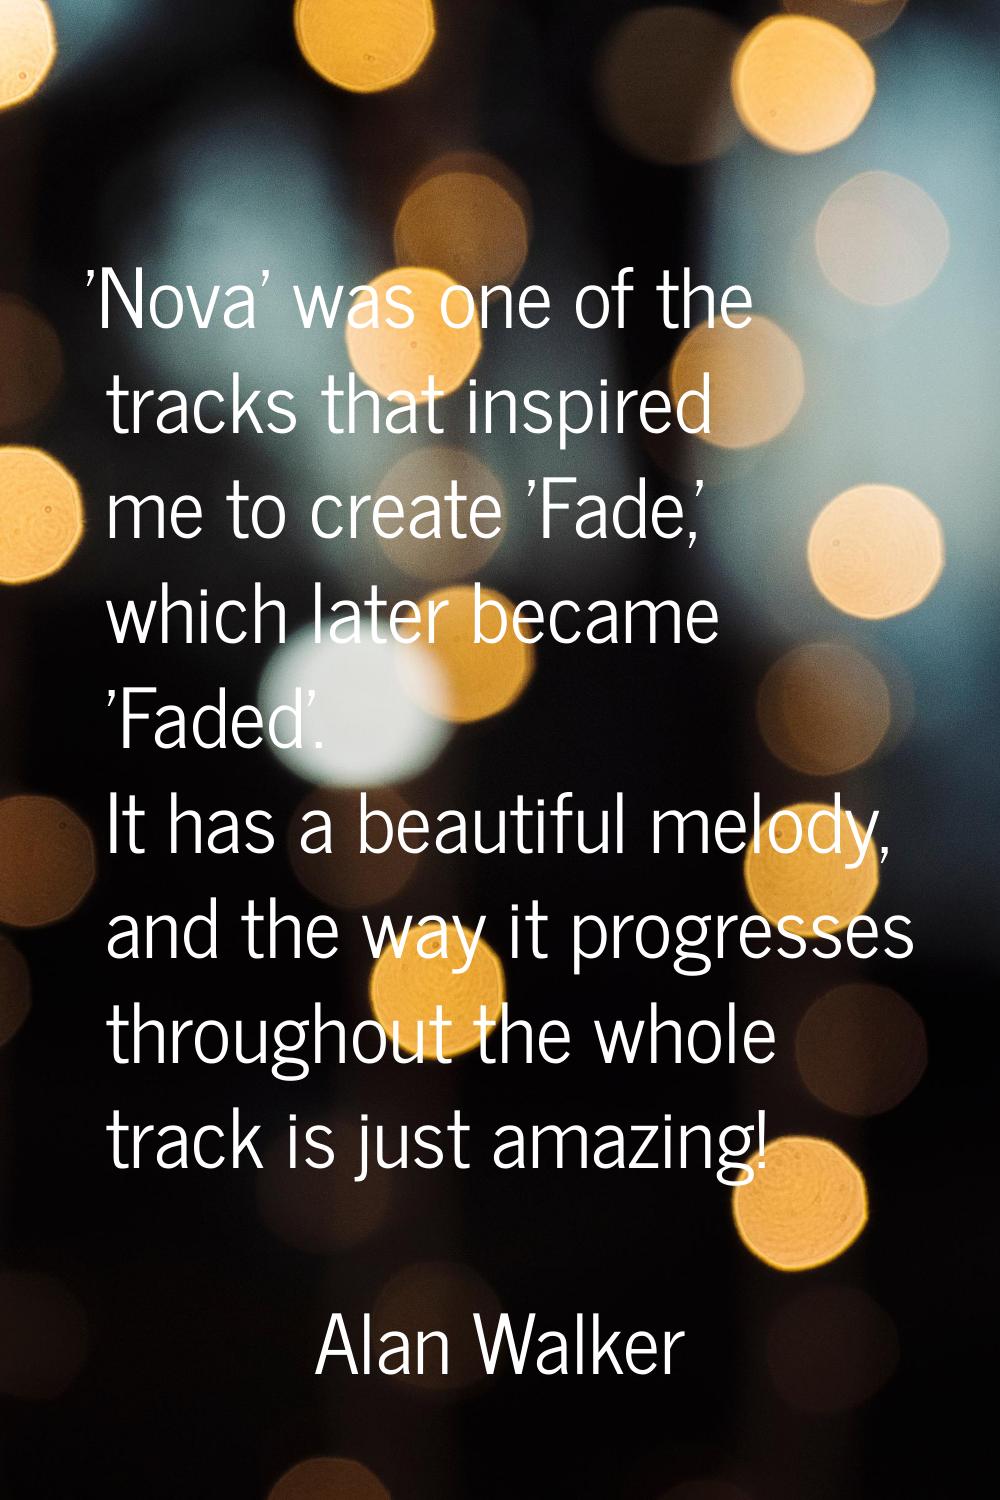 'Nova' was one of the tracks that inspired me to create 'Fade,' which later became 'Faded'. It has 